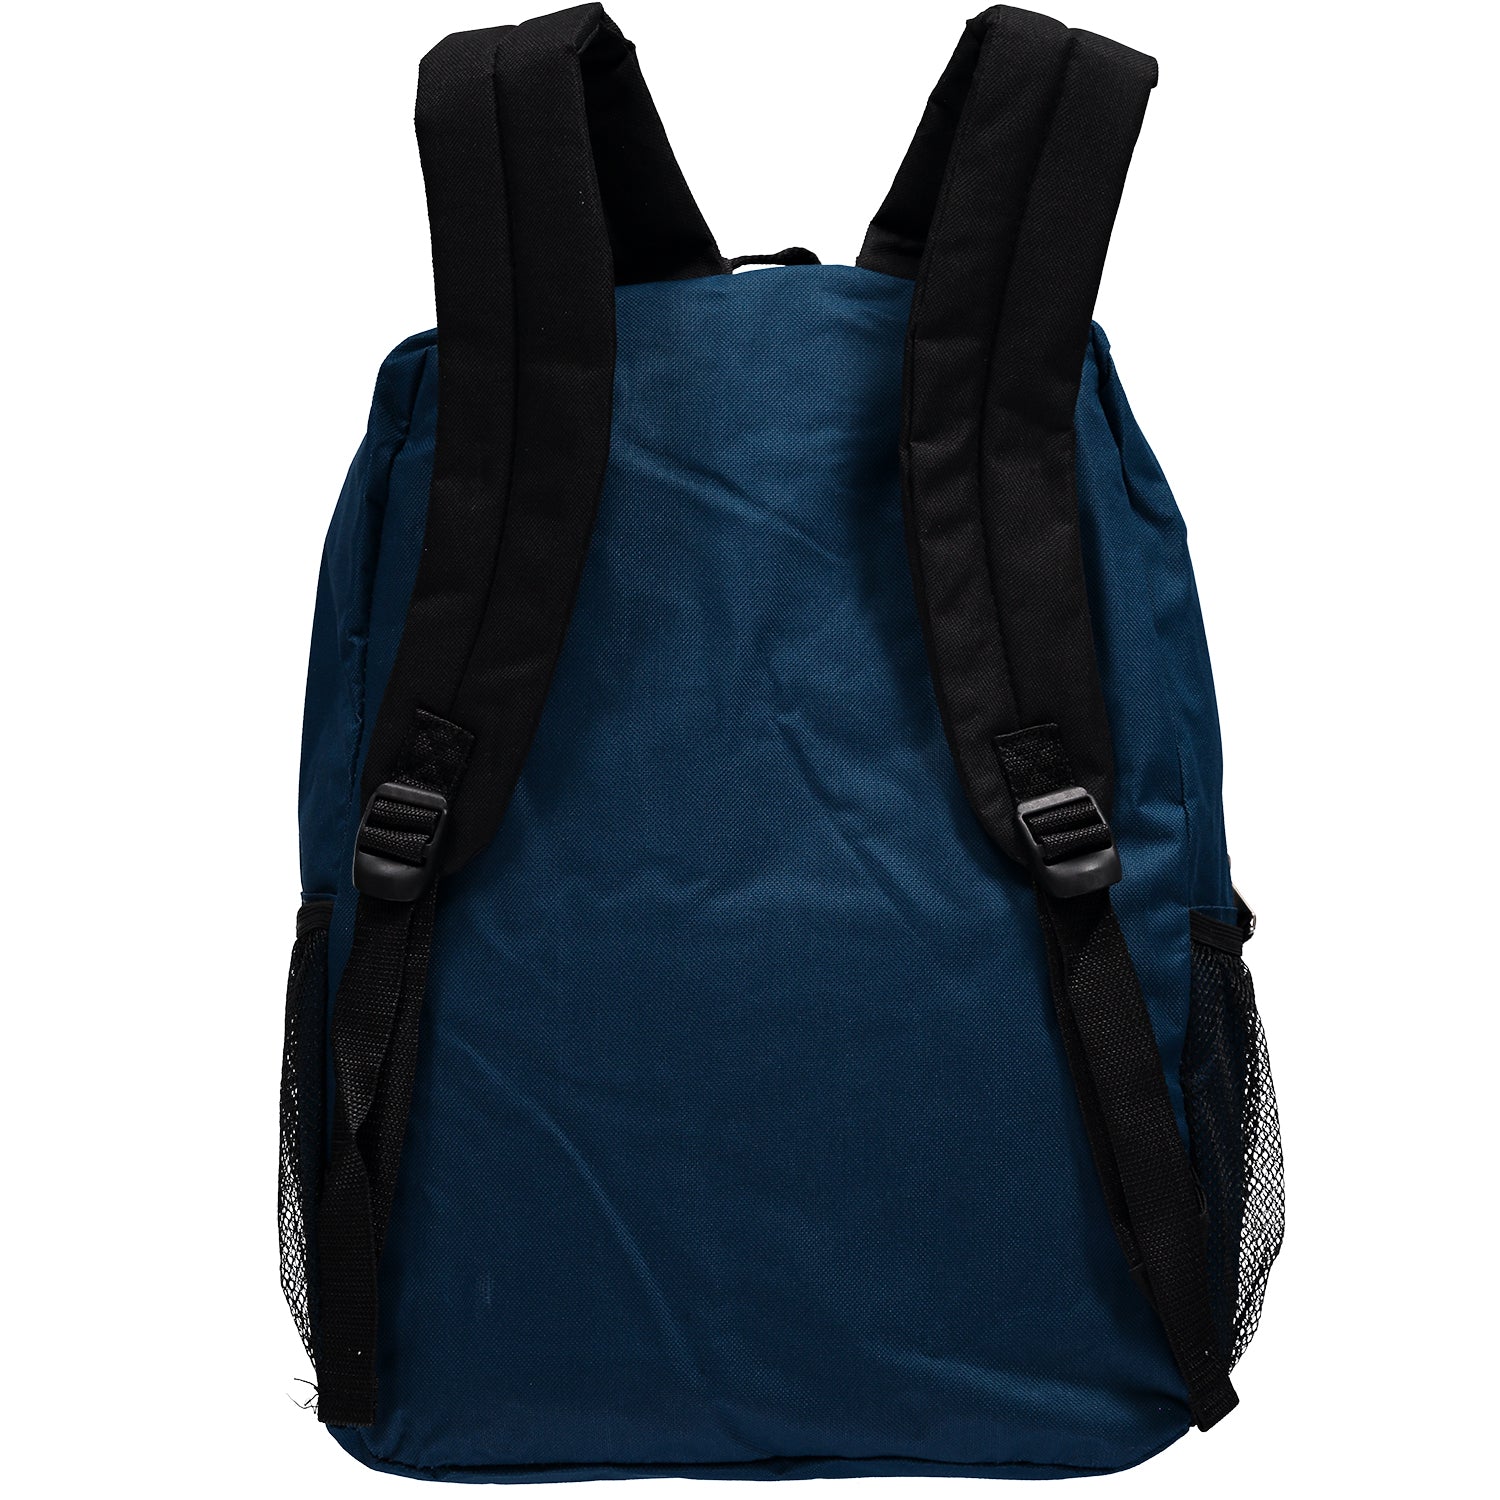 AD Sutton Summit Ridge Bulk Reflective Backpack with Pockets